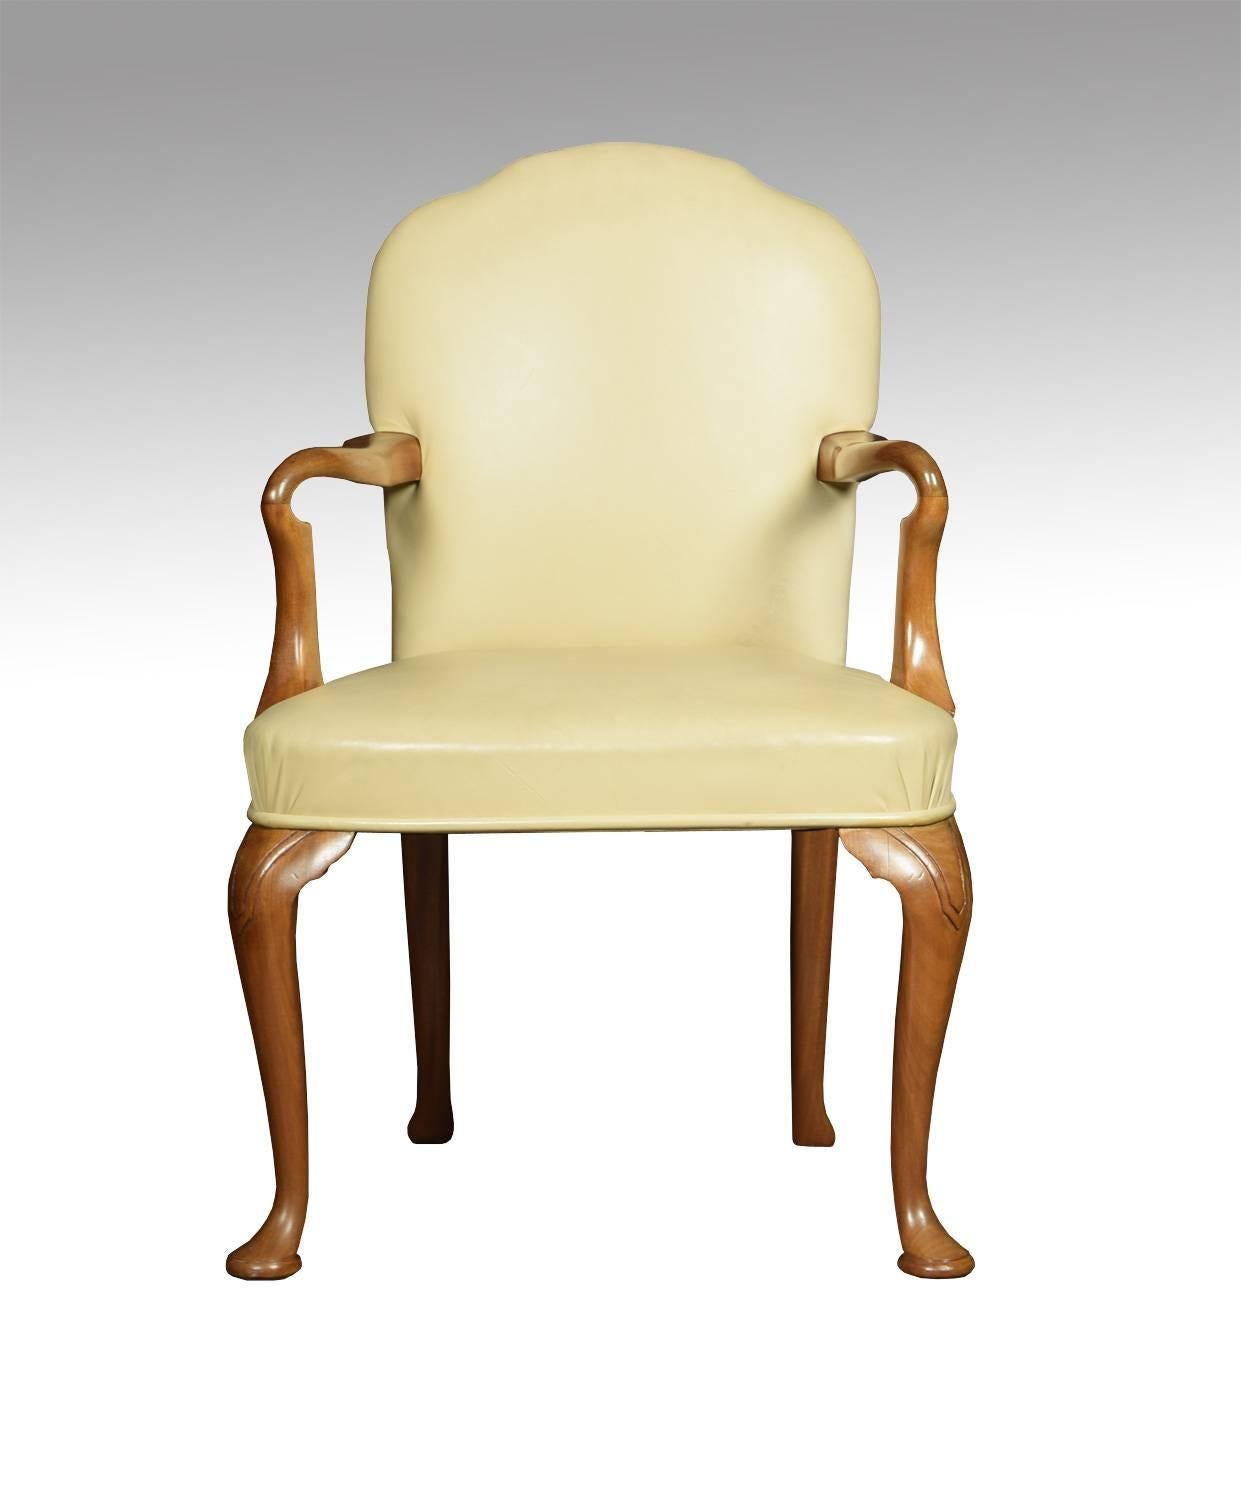 Pair of Queen Ann style office armchairs the cream leather upholstered back and seat flanked by walnut arms. All raised up on cabriole legs termination in pad feet
Dimensions
Height 37 inches, height to seat 18 inches
Width 24 inches
Depth 20